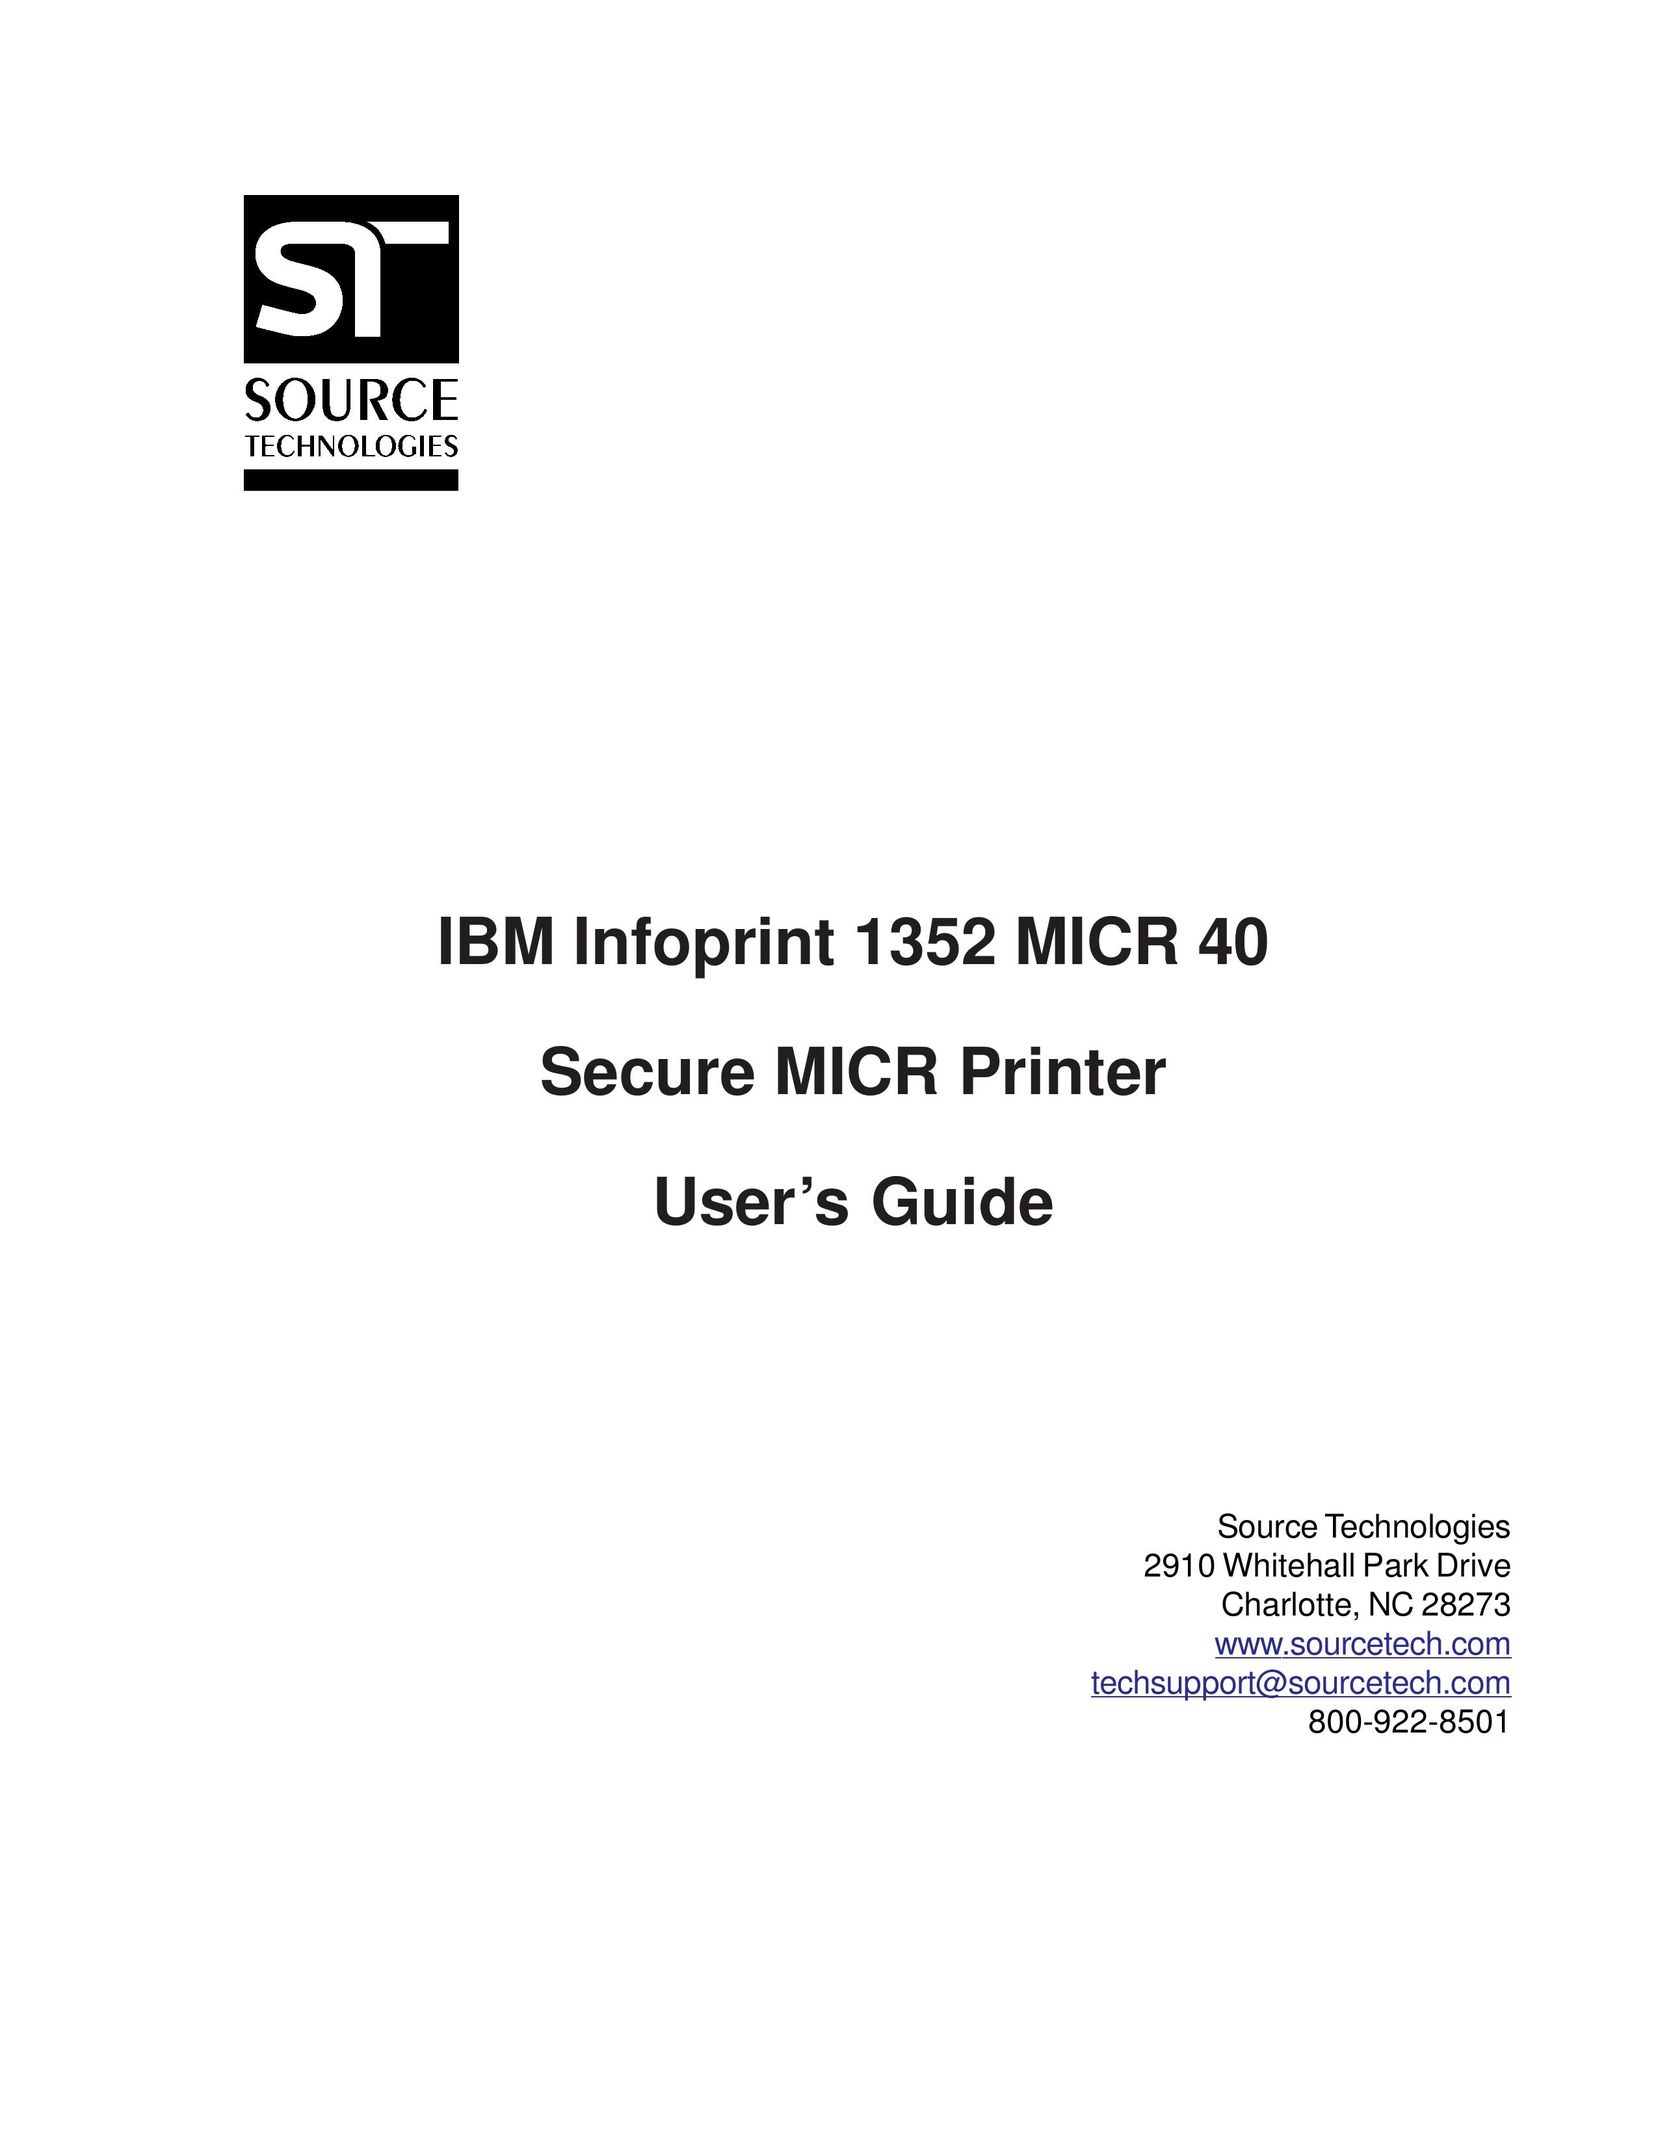 Source Technologies 1352 MICR 40 All in One Printer User Manual